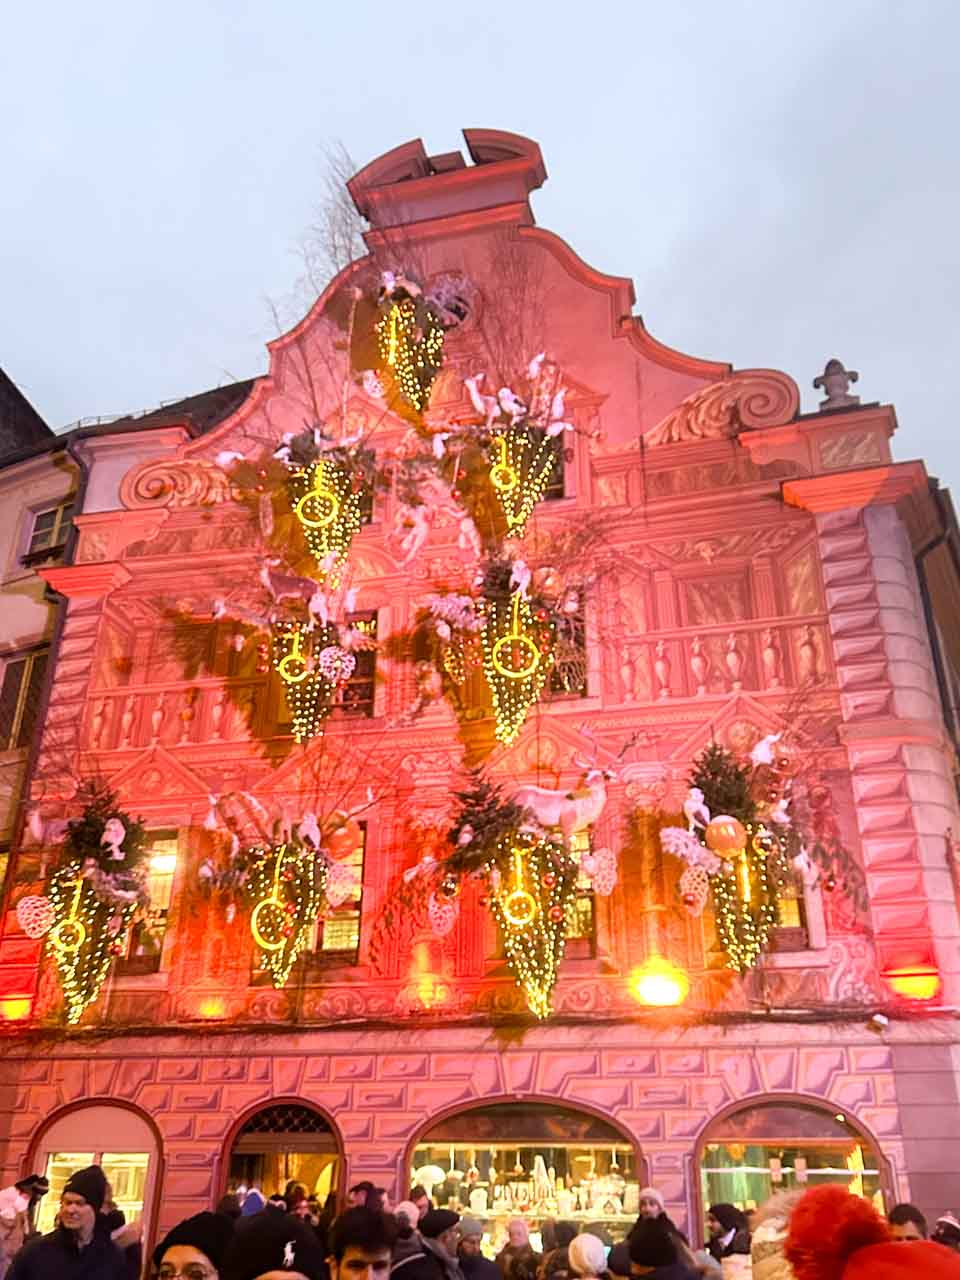 A striking facade of a building in Strasbourg illuminated with warm pink lighting and vibrant Christmas decorations